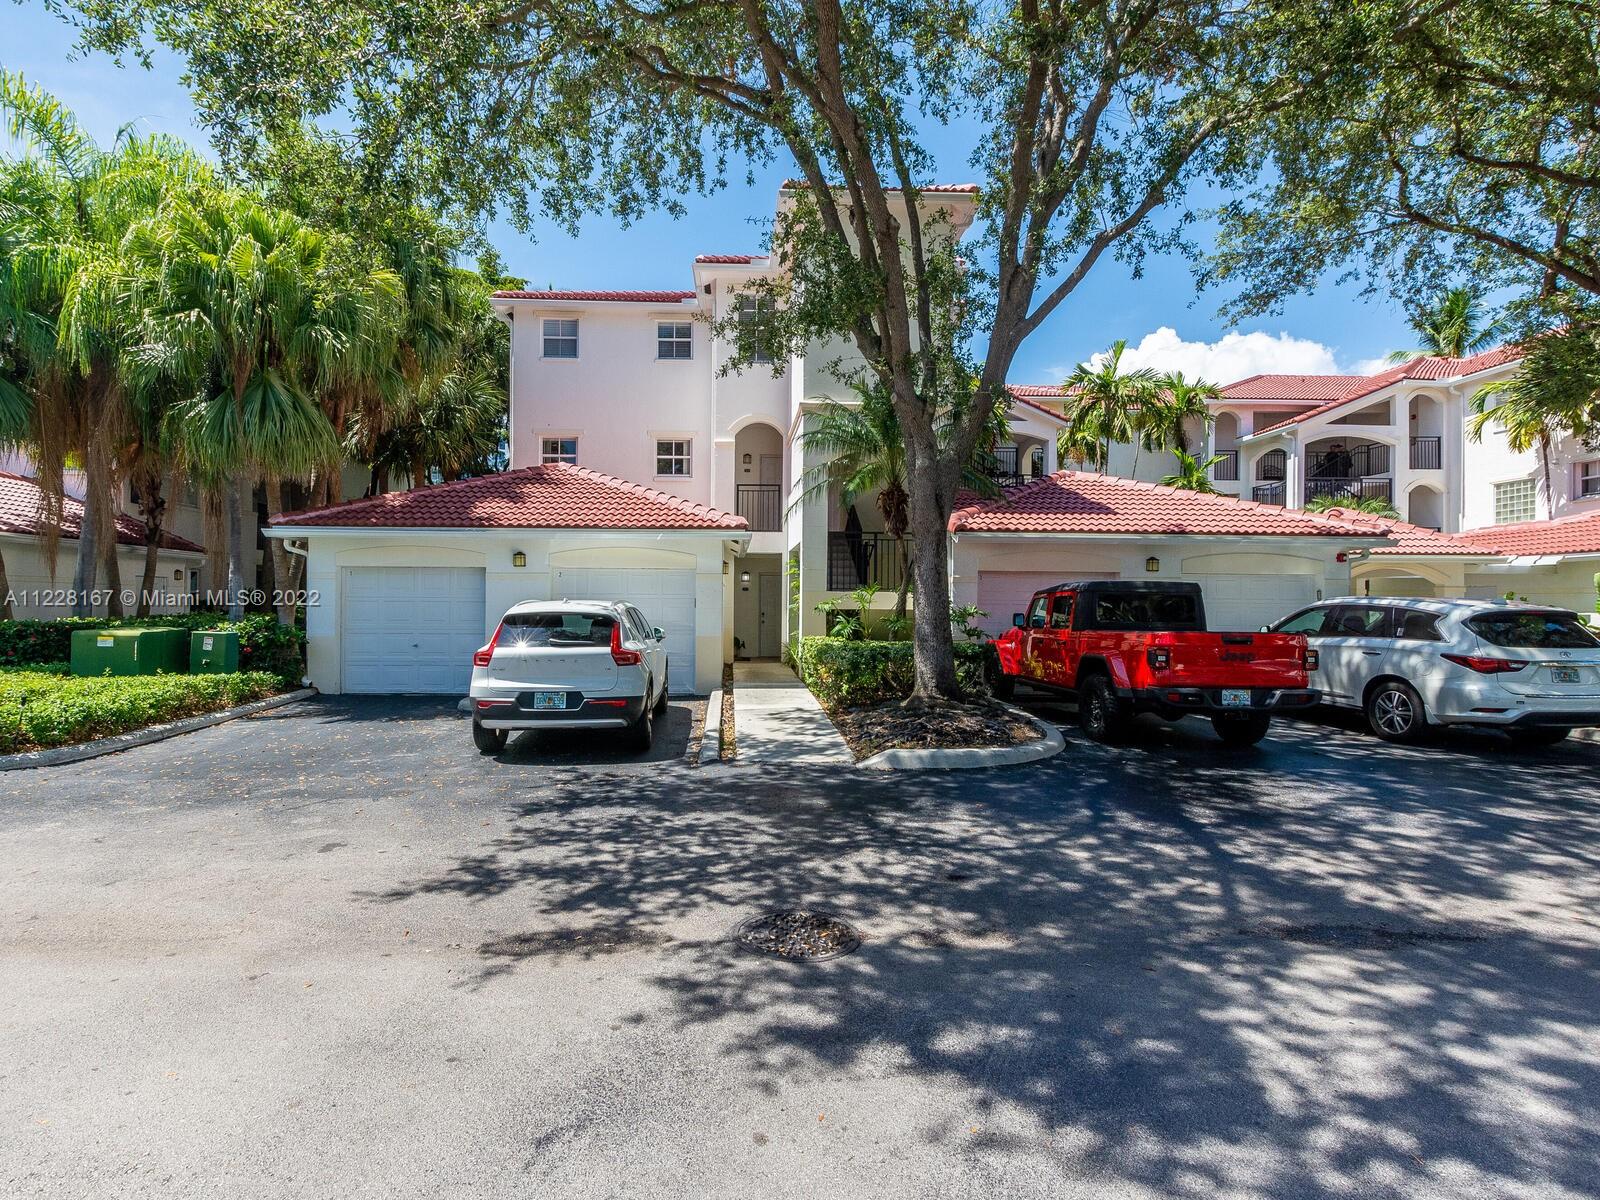 BEAUTIFUL 1 BED/1 BATH CONDO WITH ATTACHED PRIVATE GARAGE IN A RESORT STYLE GATED COMMUNITY IN THE HEART OF AVENTURA. IT TILED THROUGHOUT, HAS SPACIOUS WALK IN CLOSET, WASHER AND DRYER, GOOD SIZE KITCHEN. CAN BE RENTED RIGHT AFTER THE PURCHASE FOR 30 DAYS MIN, PET FRIENDLY GATED COMMUNITY